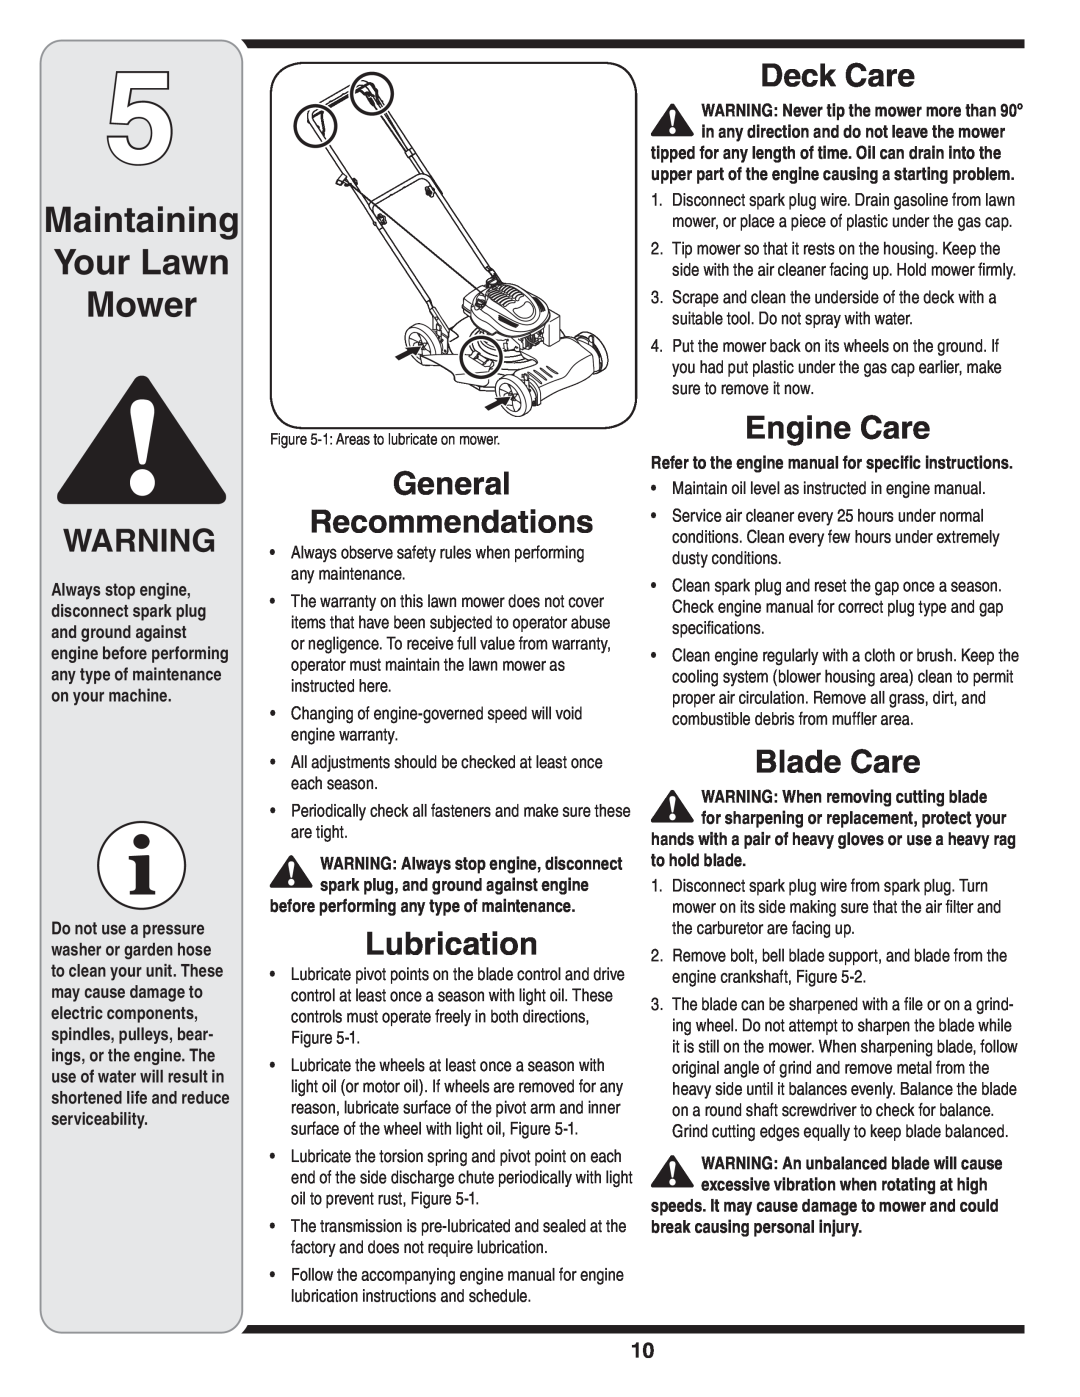 Yard-Man 263 warranty Maintaining Your Lawn Mower, General Recommendations, Lubrication, Deck Care, Engine Care, Blade Care 